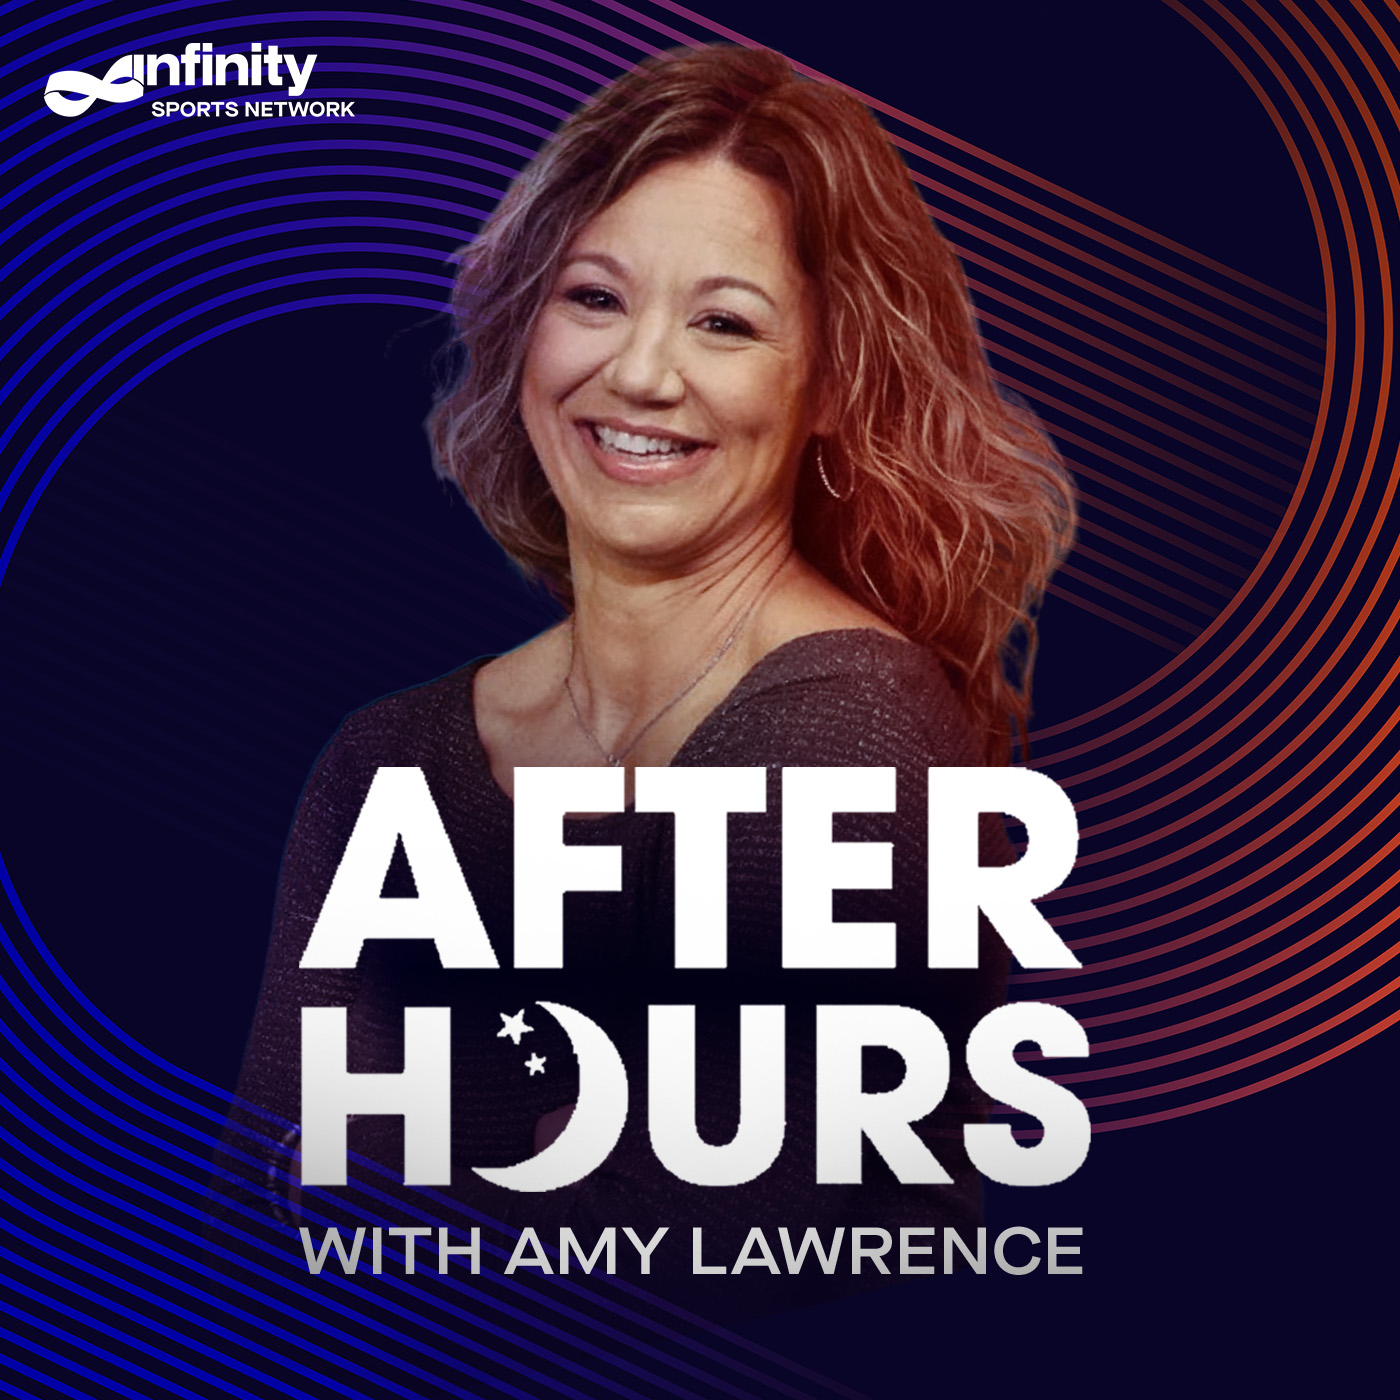 7/19/21 After Hours with Amy Lawrence PODCAST: Hour 3